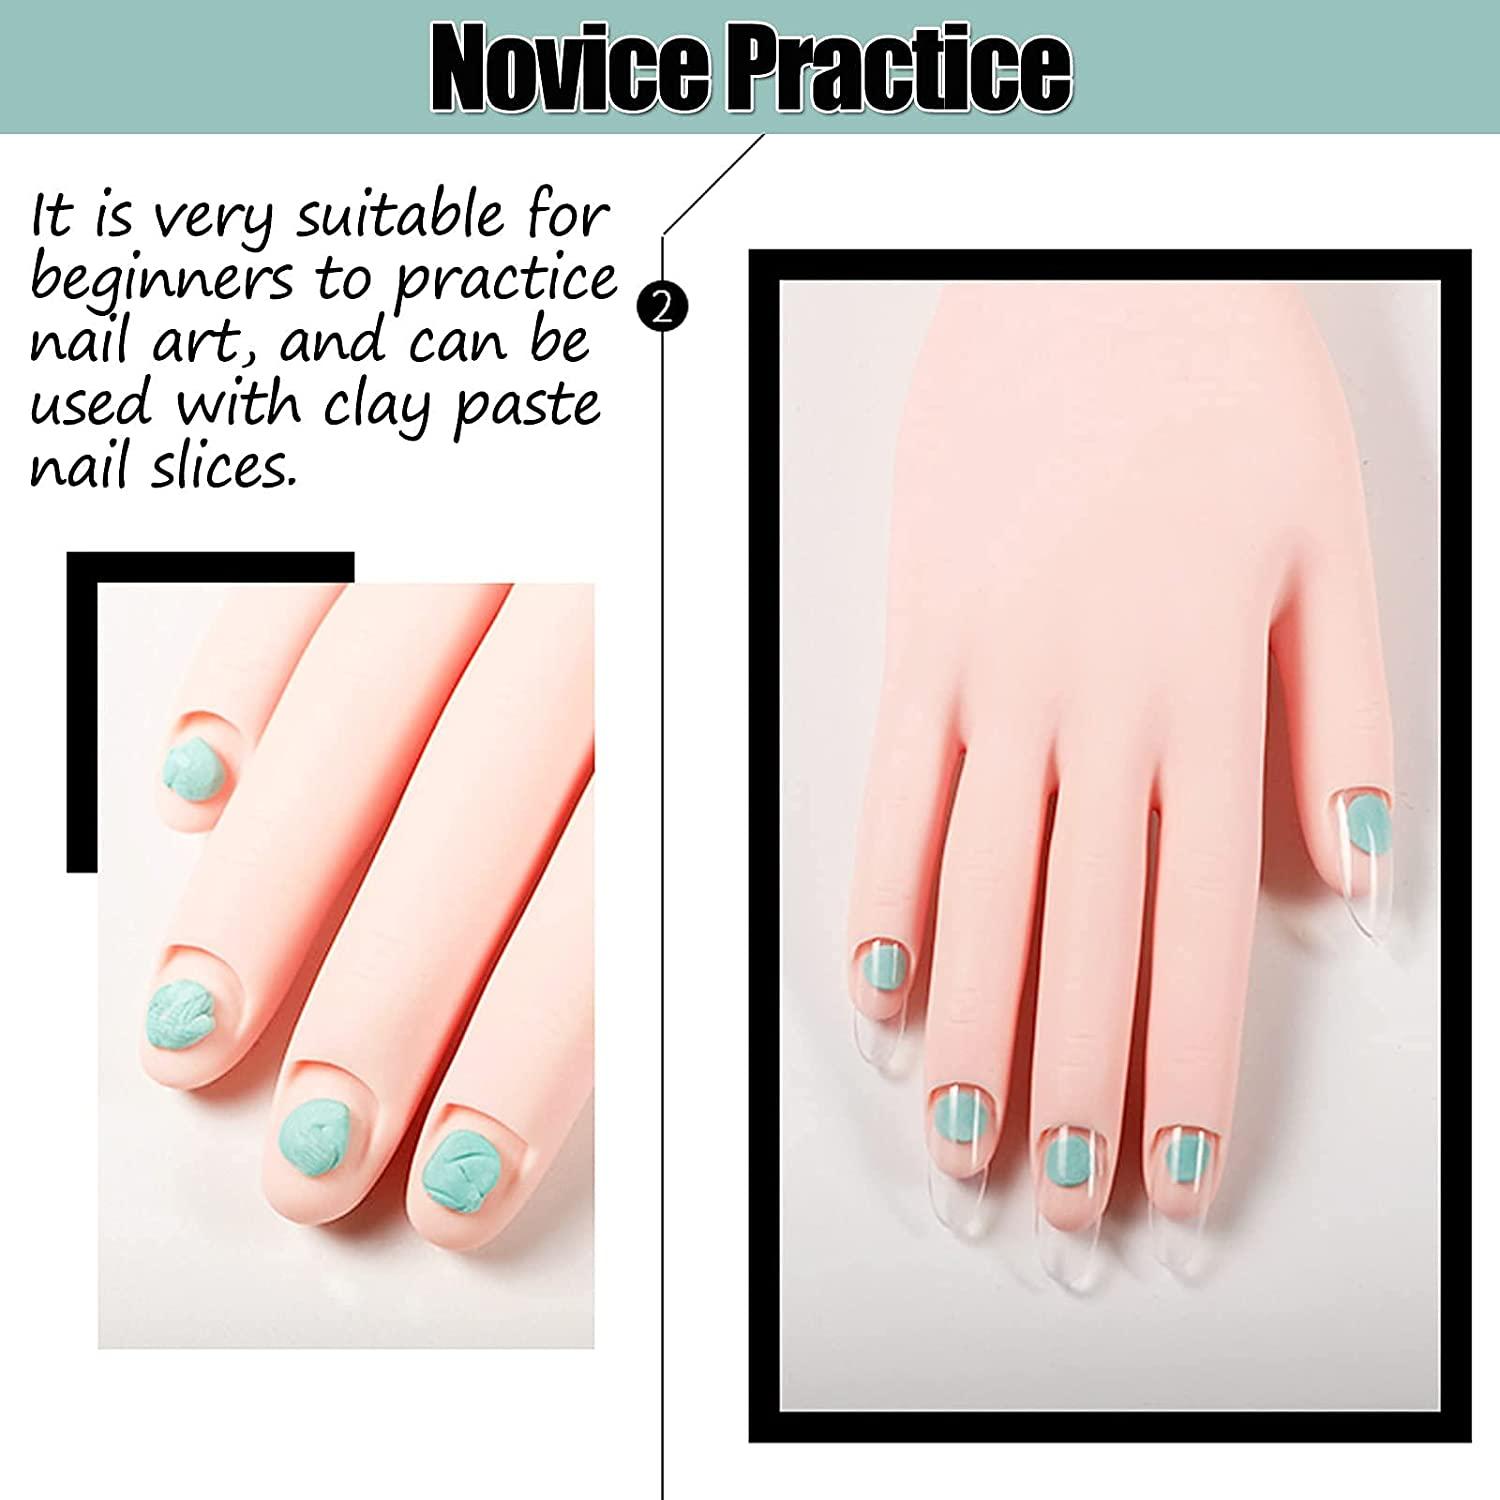 GULALUUK Hand for Nail Practice Fake Hands to Practice Fake Nails Practice  Hand for Acrylic Nails Flexible Hand for Nail Practice Kit Nai